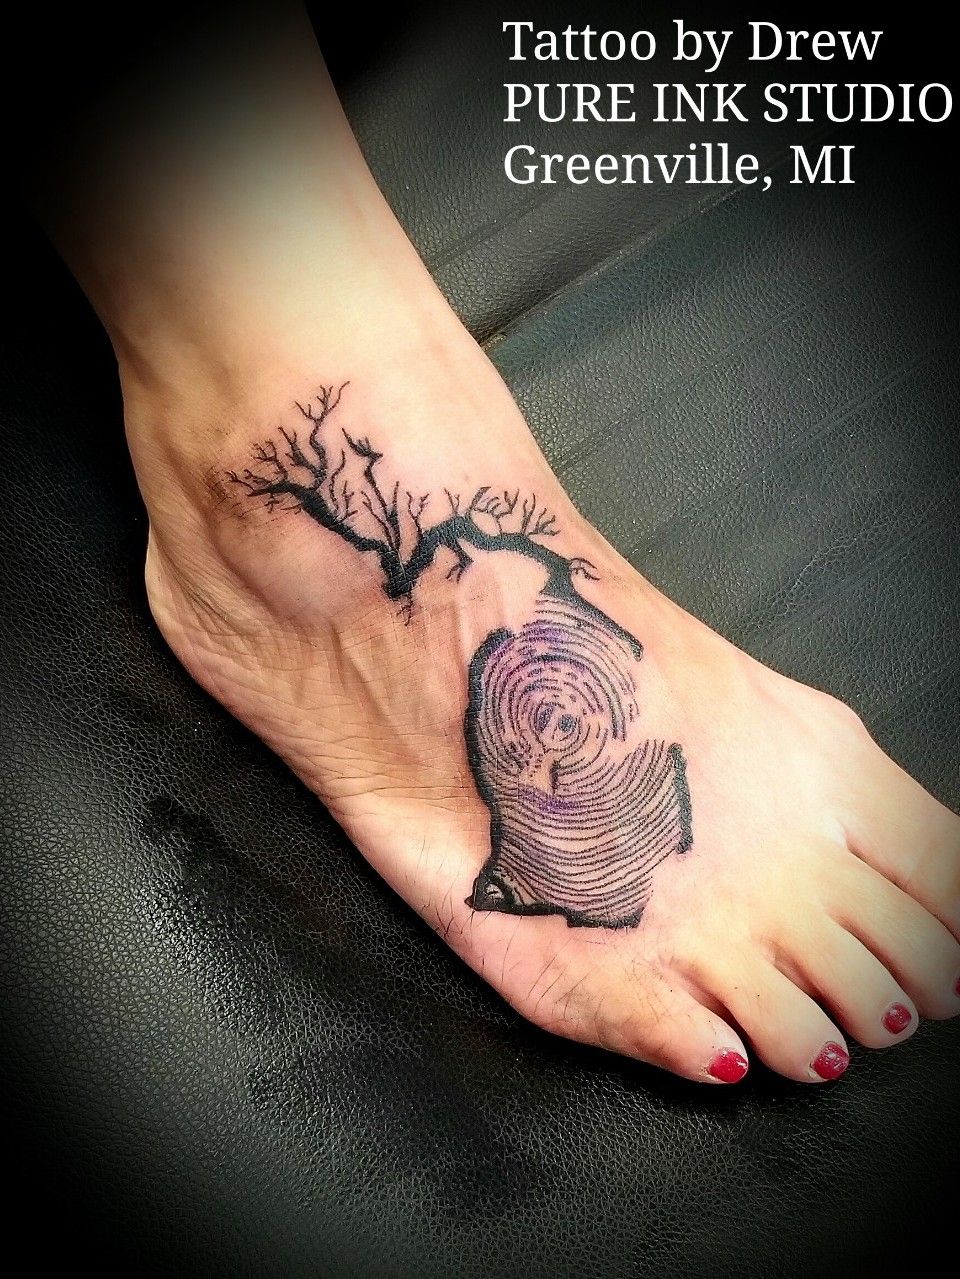 Pure Michigan tattoos states tourism brand making a splash in local ink  shops  mlivecom